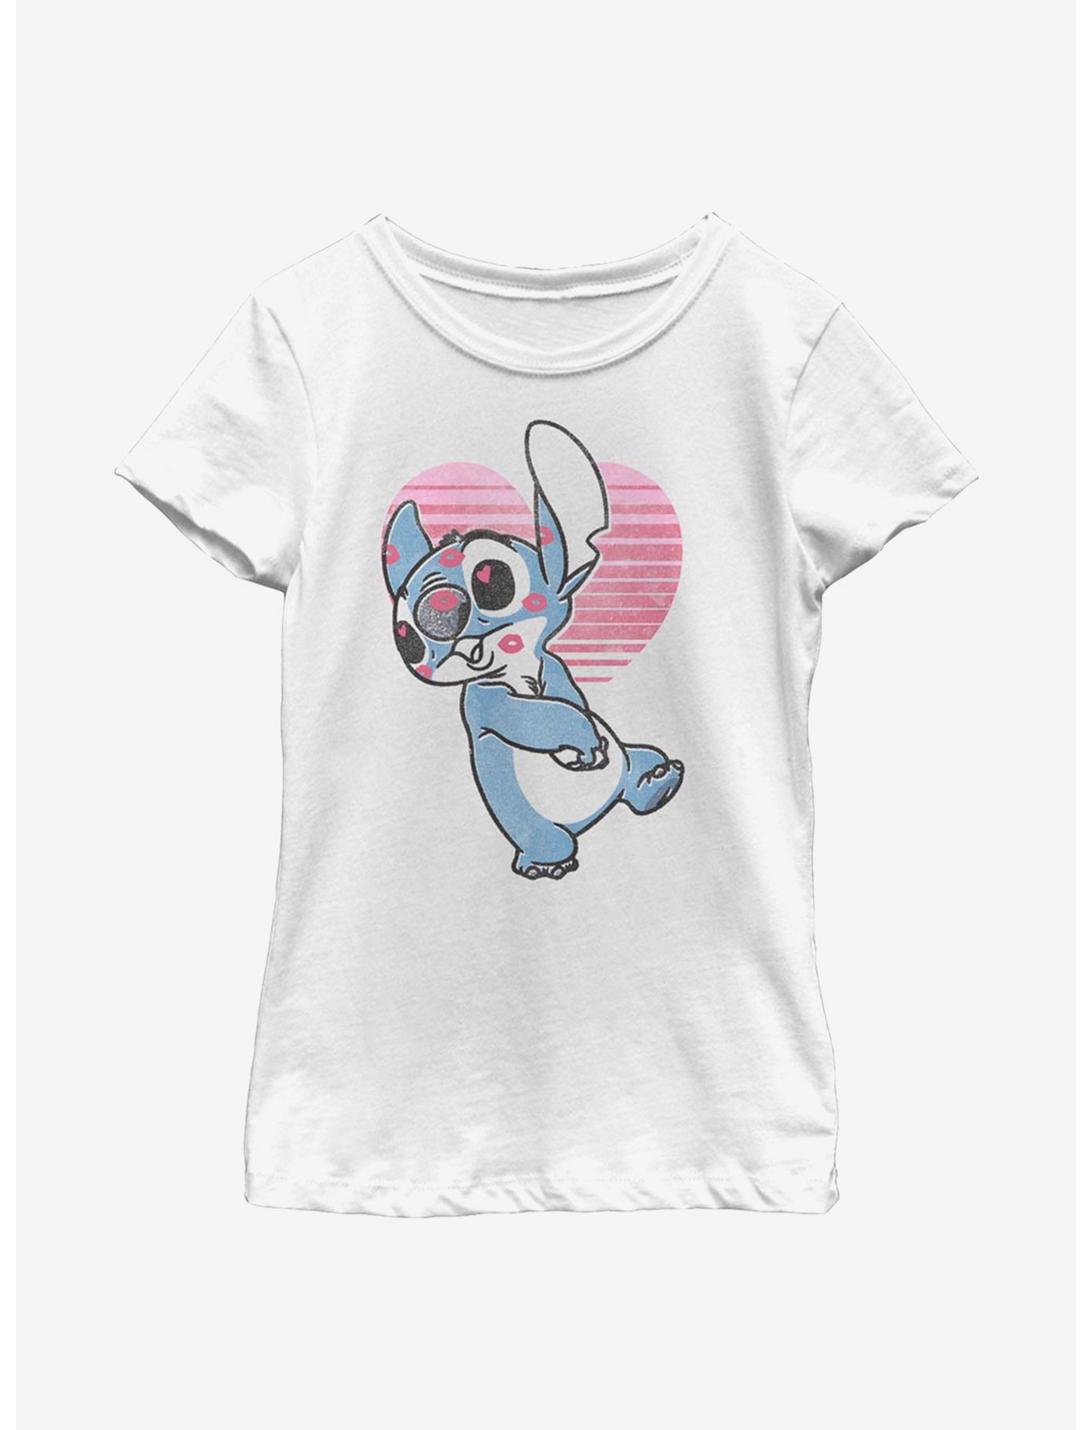 Disney Lilo And Stitch Kissy Faced Youth Girls T-Shirt, WHITE, hi-res